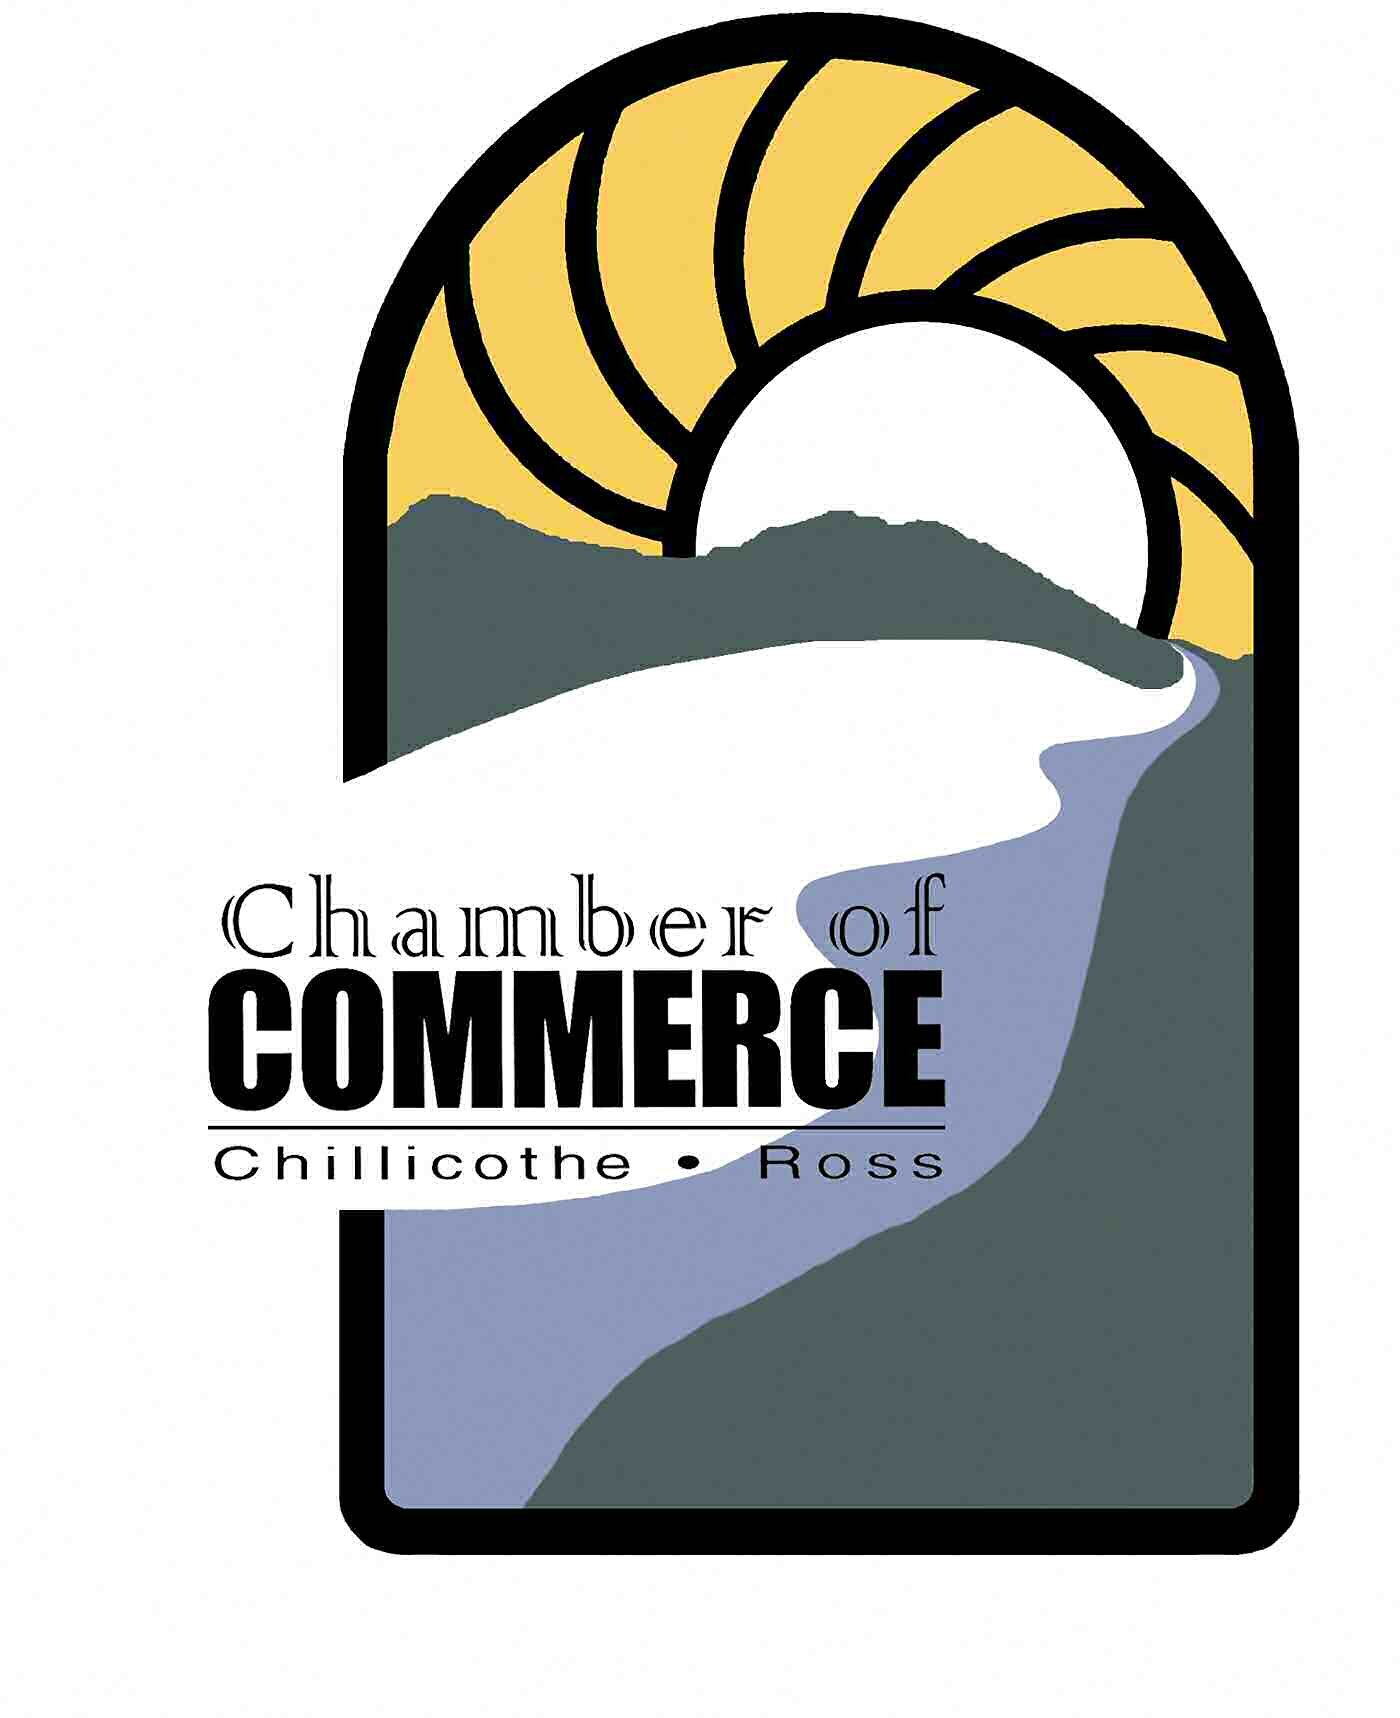 The Chillicothe Ross Chamber of Commerce connects our investors and partners to resources to drive growth and change in our community.